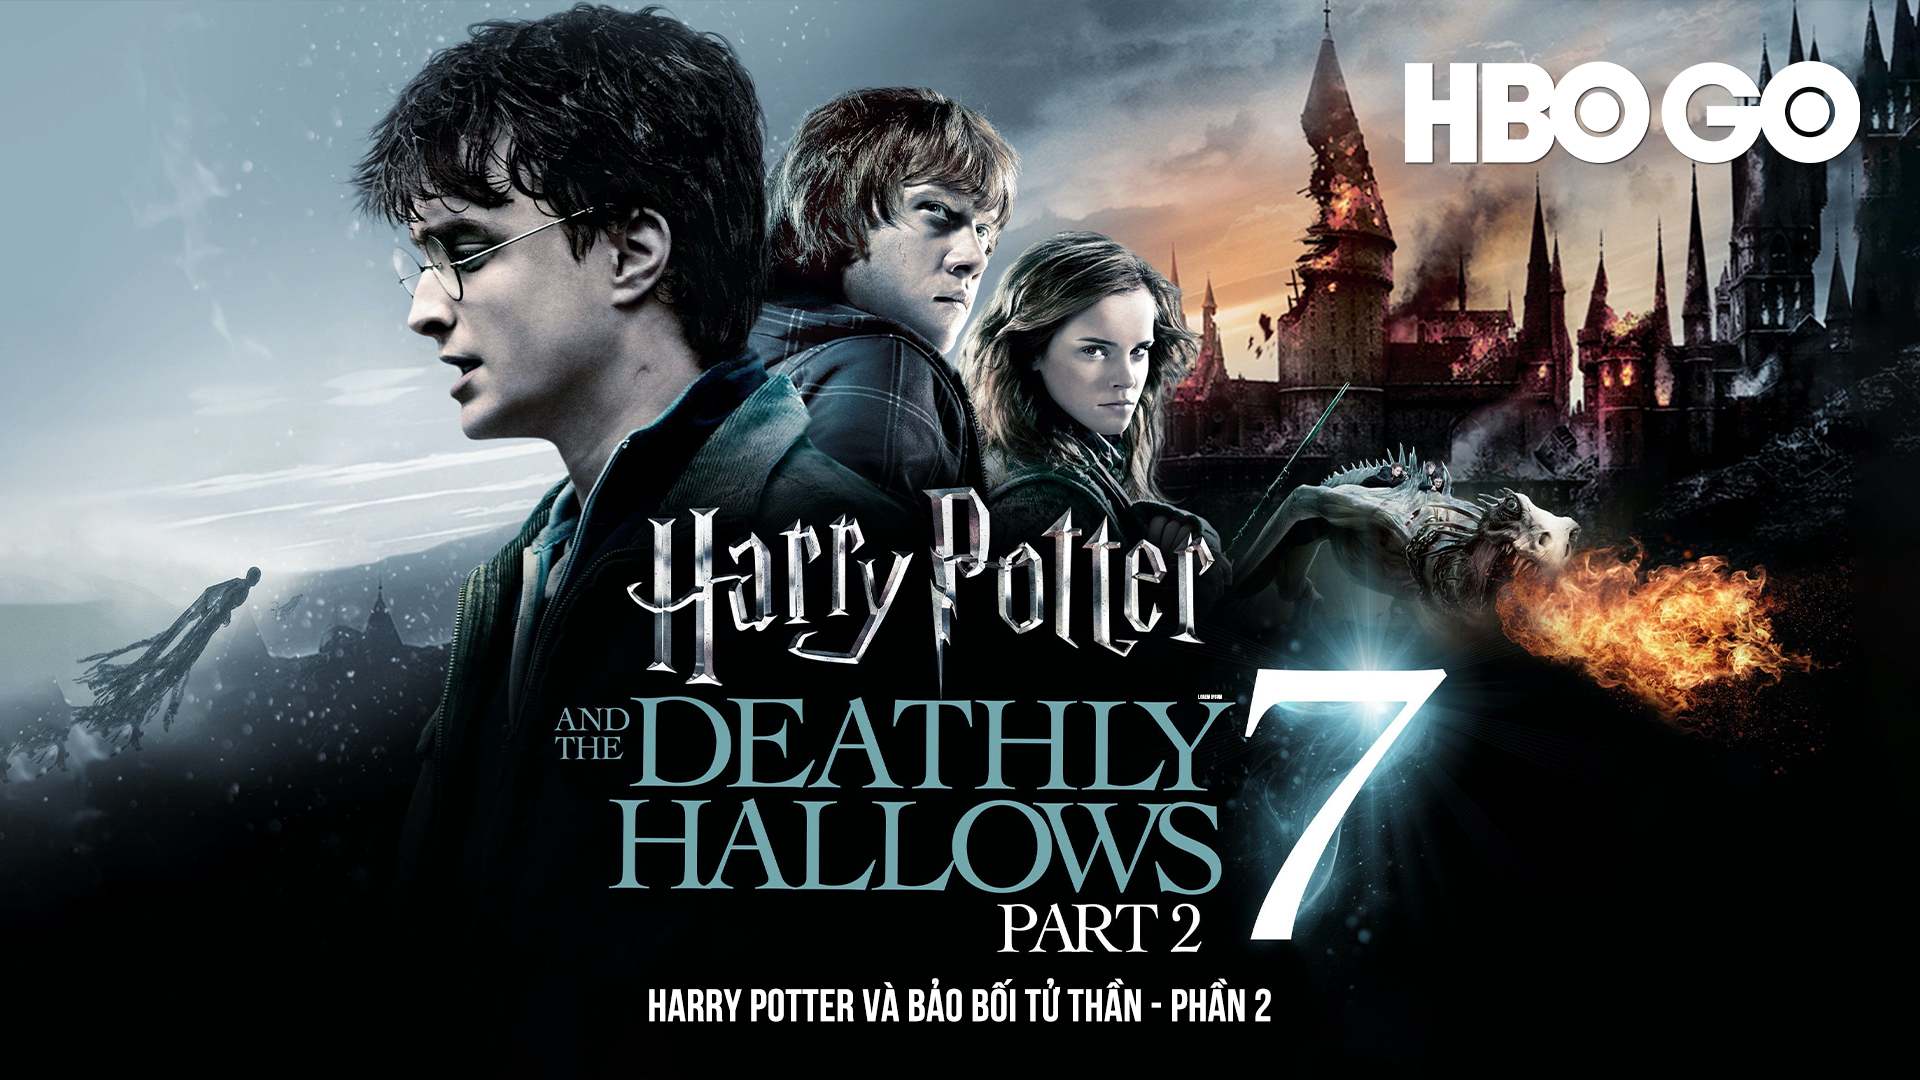 Harry Potter 7: Harry Potter and the Deathly Hallows (Part 2) / Harry Potter 7: Harry Potter and the Deathly Hallows (Part 2) (2011)